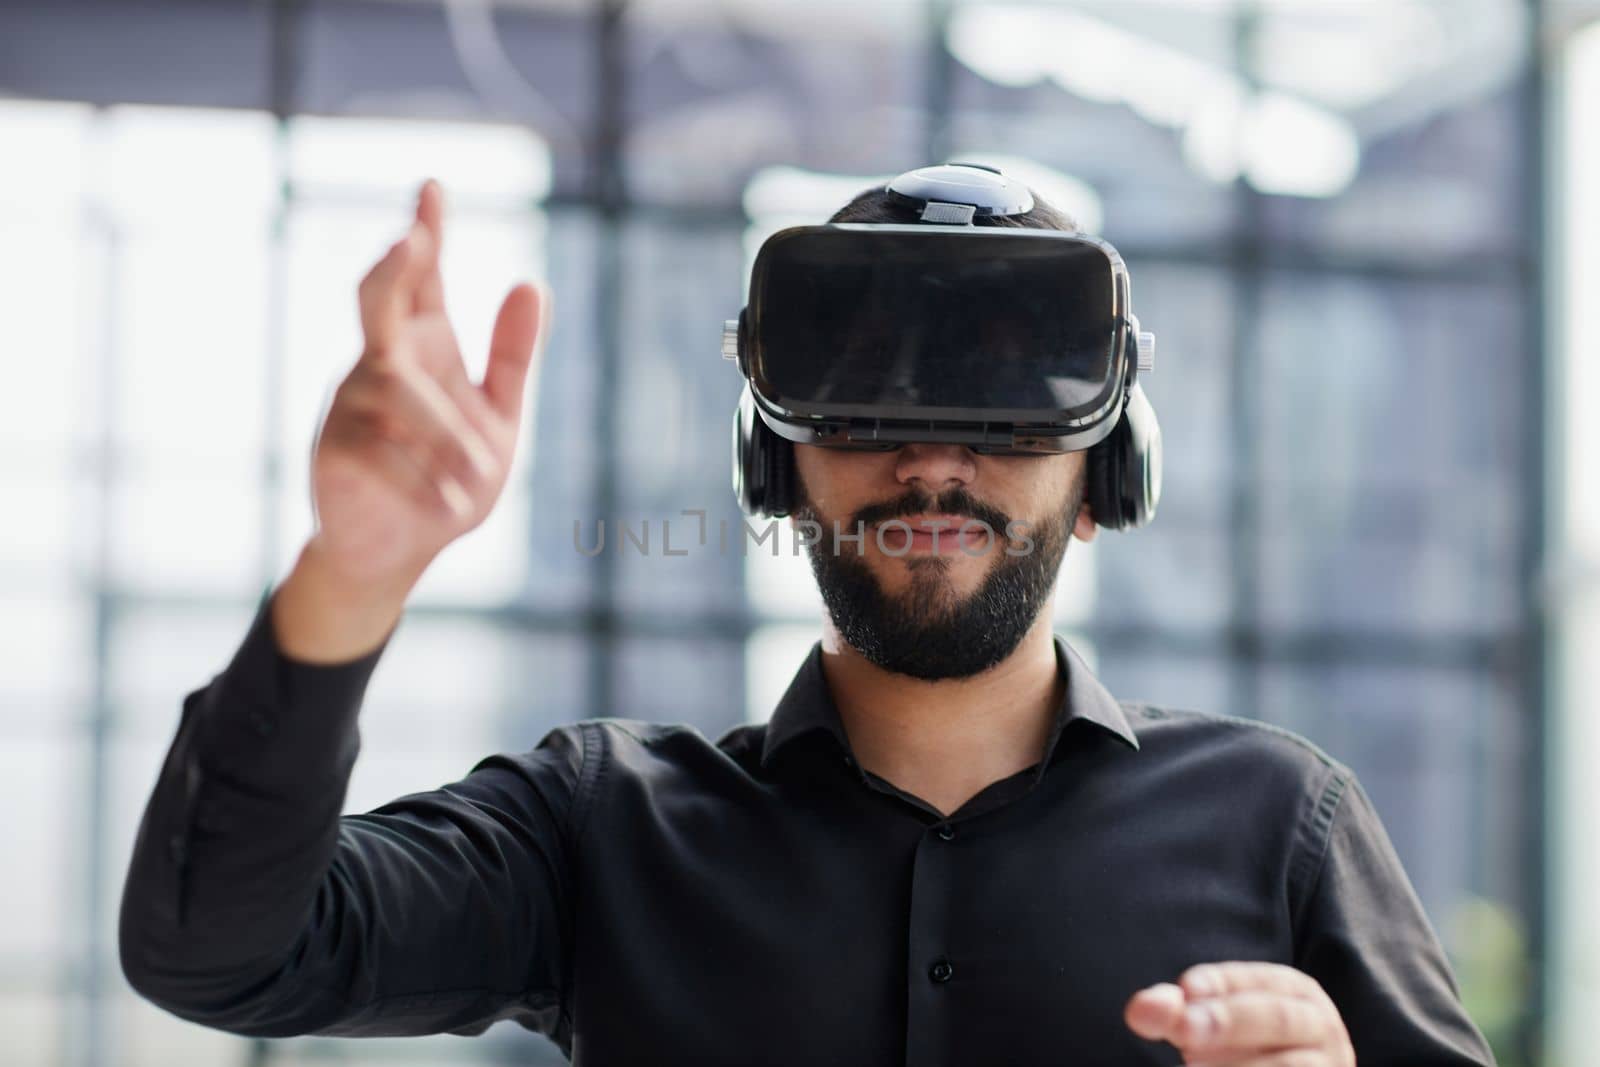 Businessman with virtual reality headset at office